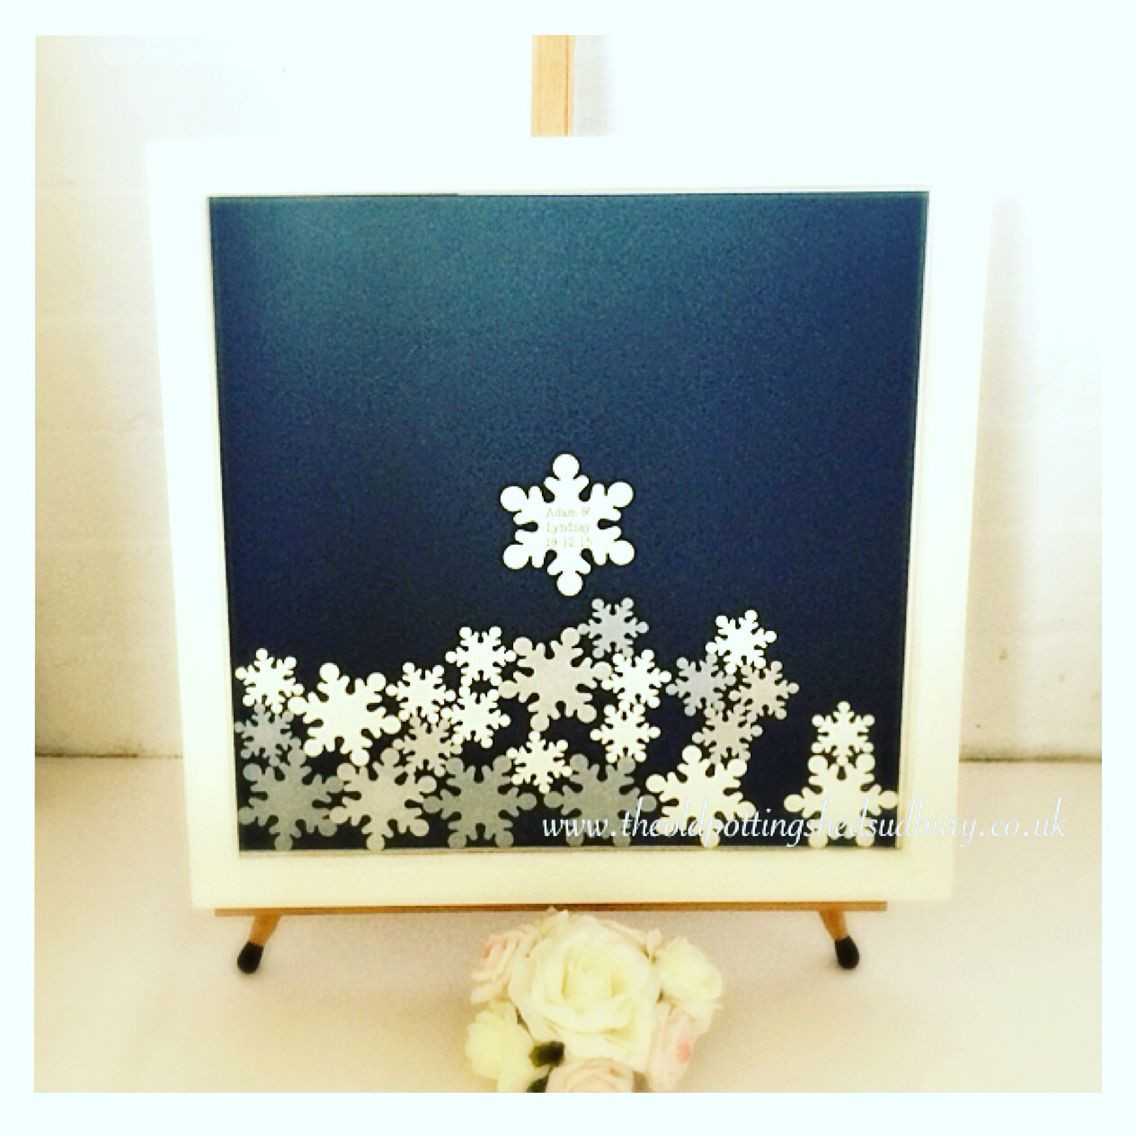 Snowflake Wedding Guest Book
 Winter wedding inspired drop top guest book A fully